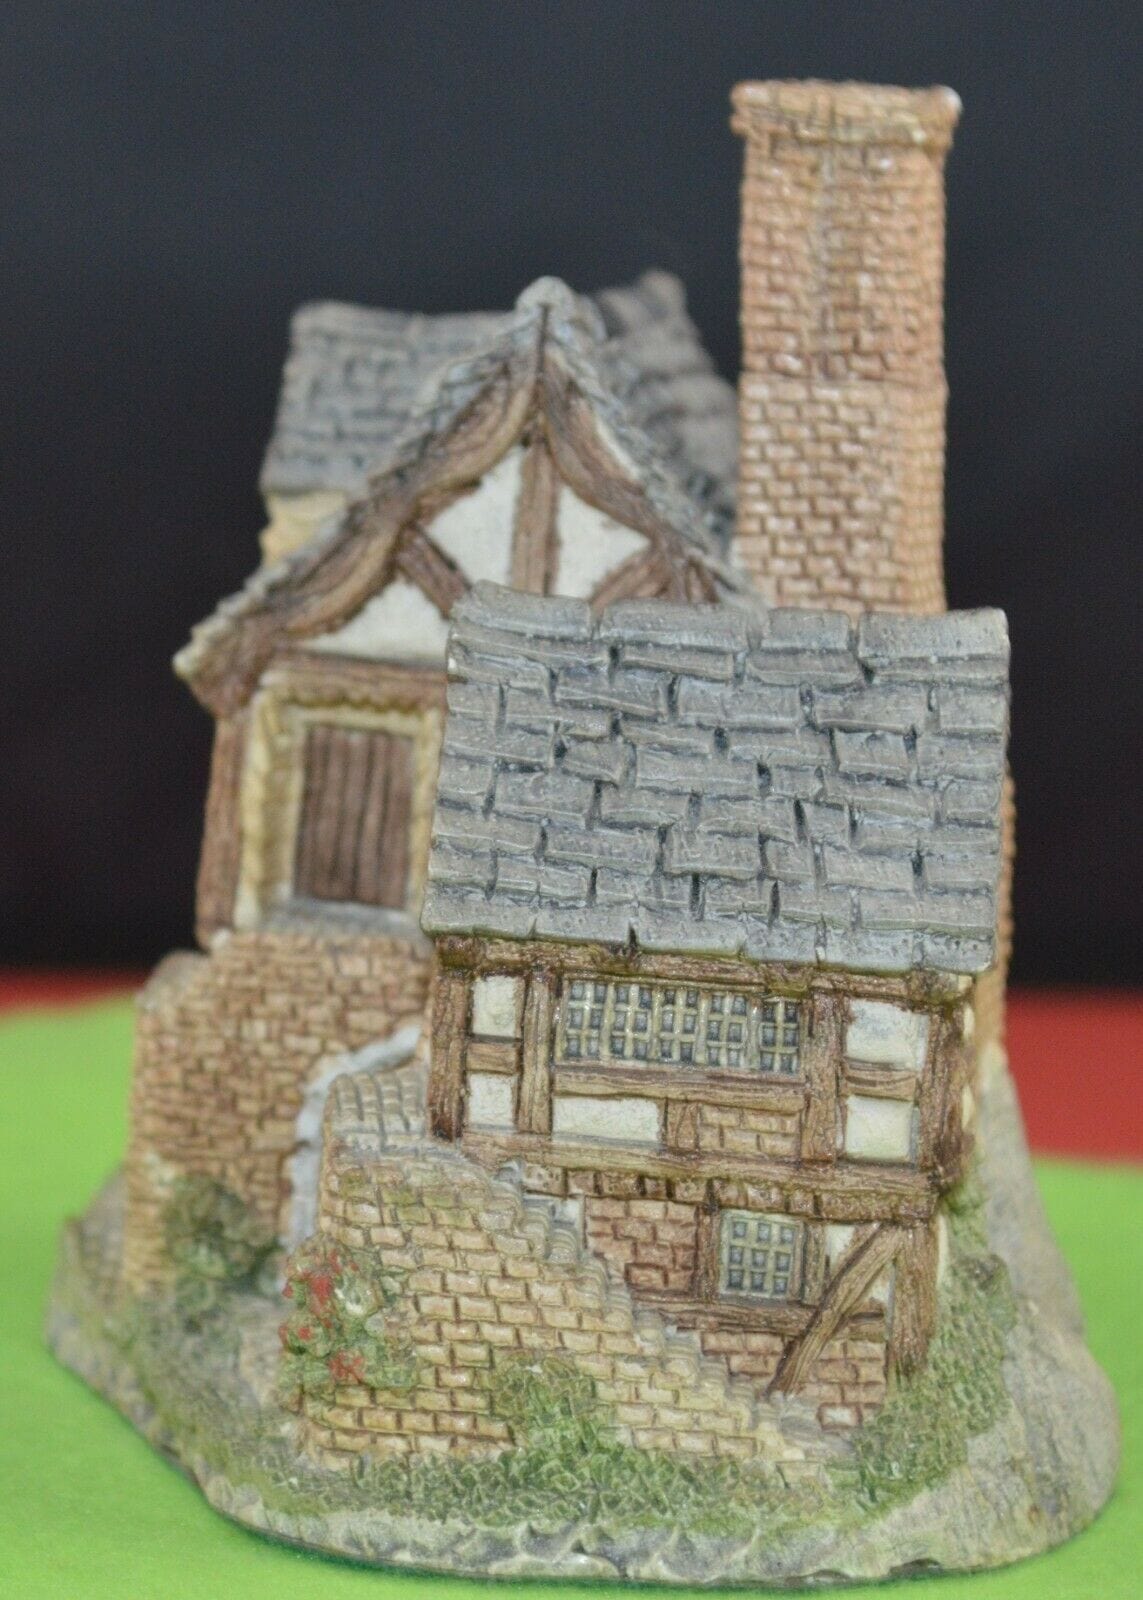 ORNAMENTAL COTTAGE DAVID WINTER THE BAKEHOUSE(PREVIOUSLY OWNED) GOOD CONDITION - TMD167207